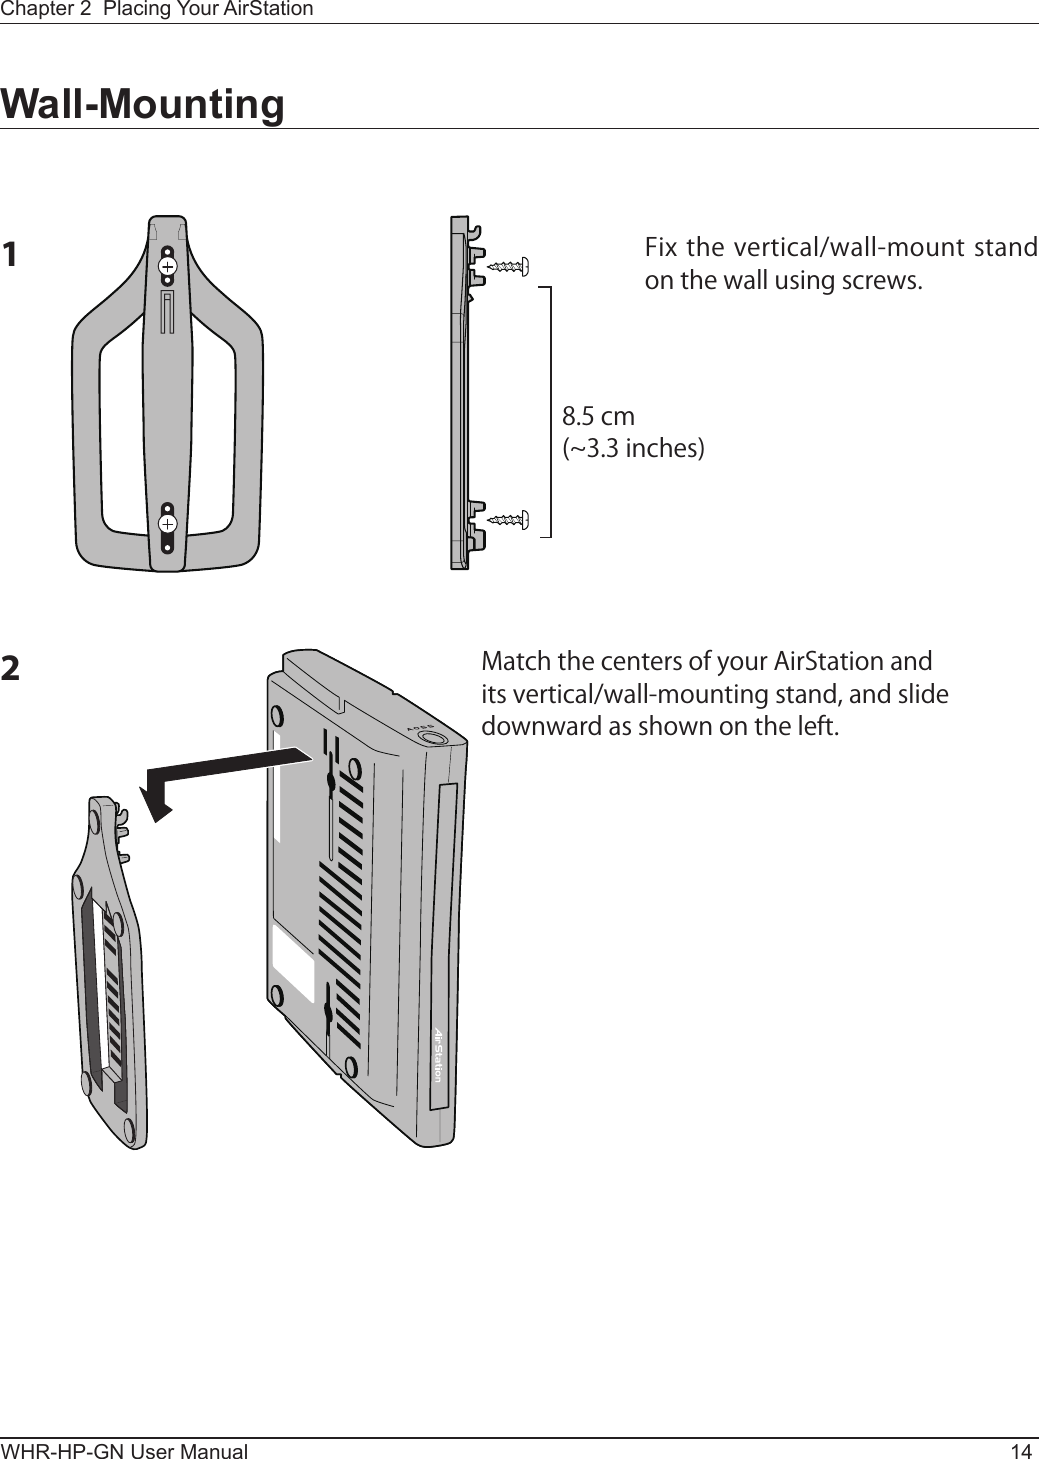 WHR-HP-GN User Manual 14Chapter 2  Placing Your AirStationWall-Mounting1Fix the vertical/wall-mount stand on the wall using screws.8.5 cm(~3.3 inches)2Match the centers of your AirStation and its vertical/wall-mounting stand, and slide downward as shown on the left.